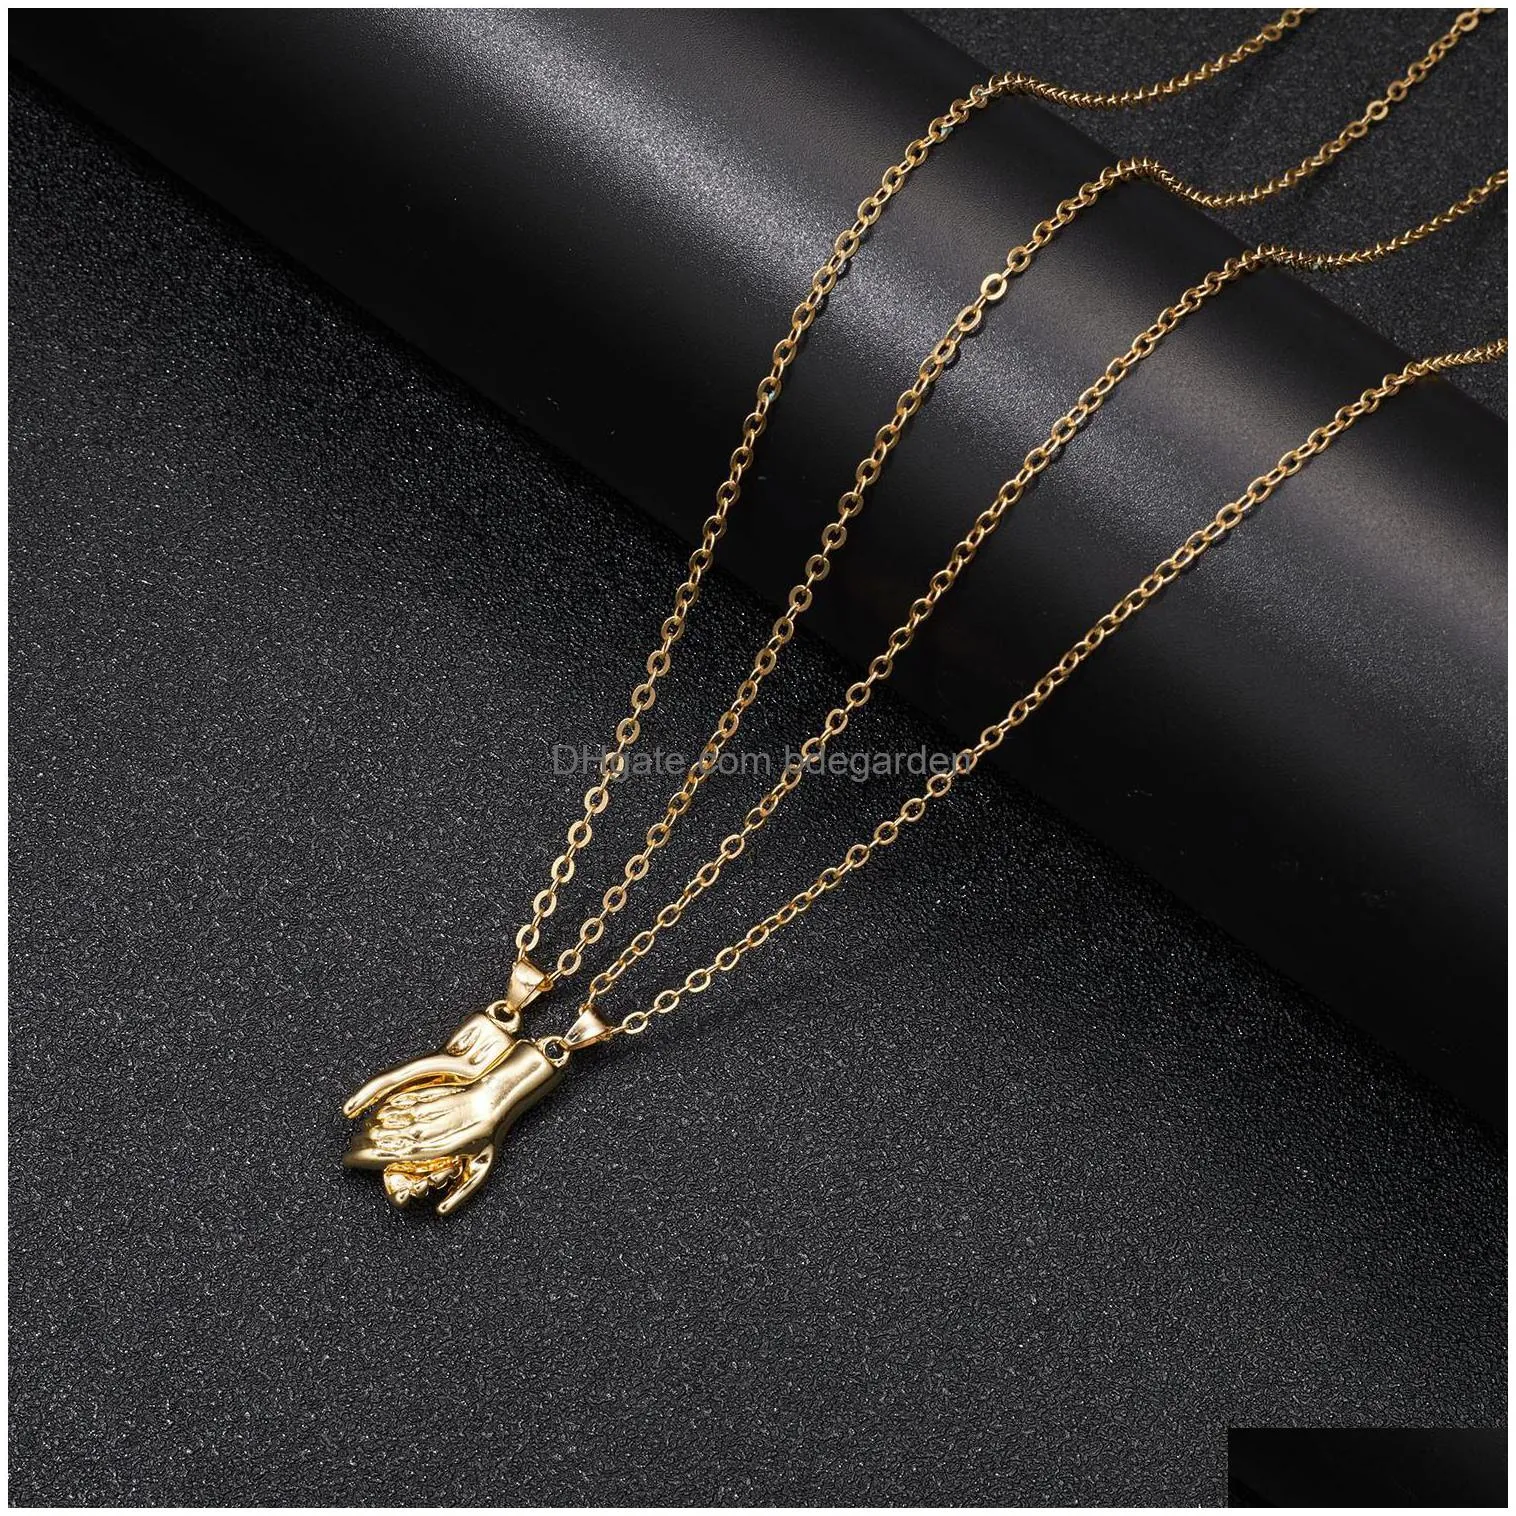 2pcs/lot magnetic hand in hand pendant necklace matching necklaces jewelry for couple friendship valentines day gifts